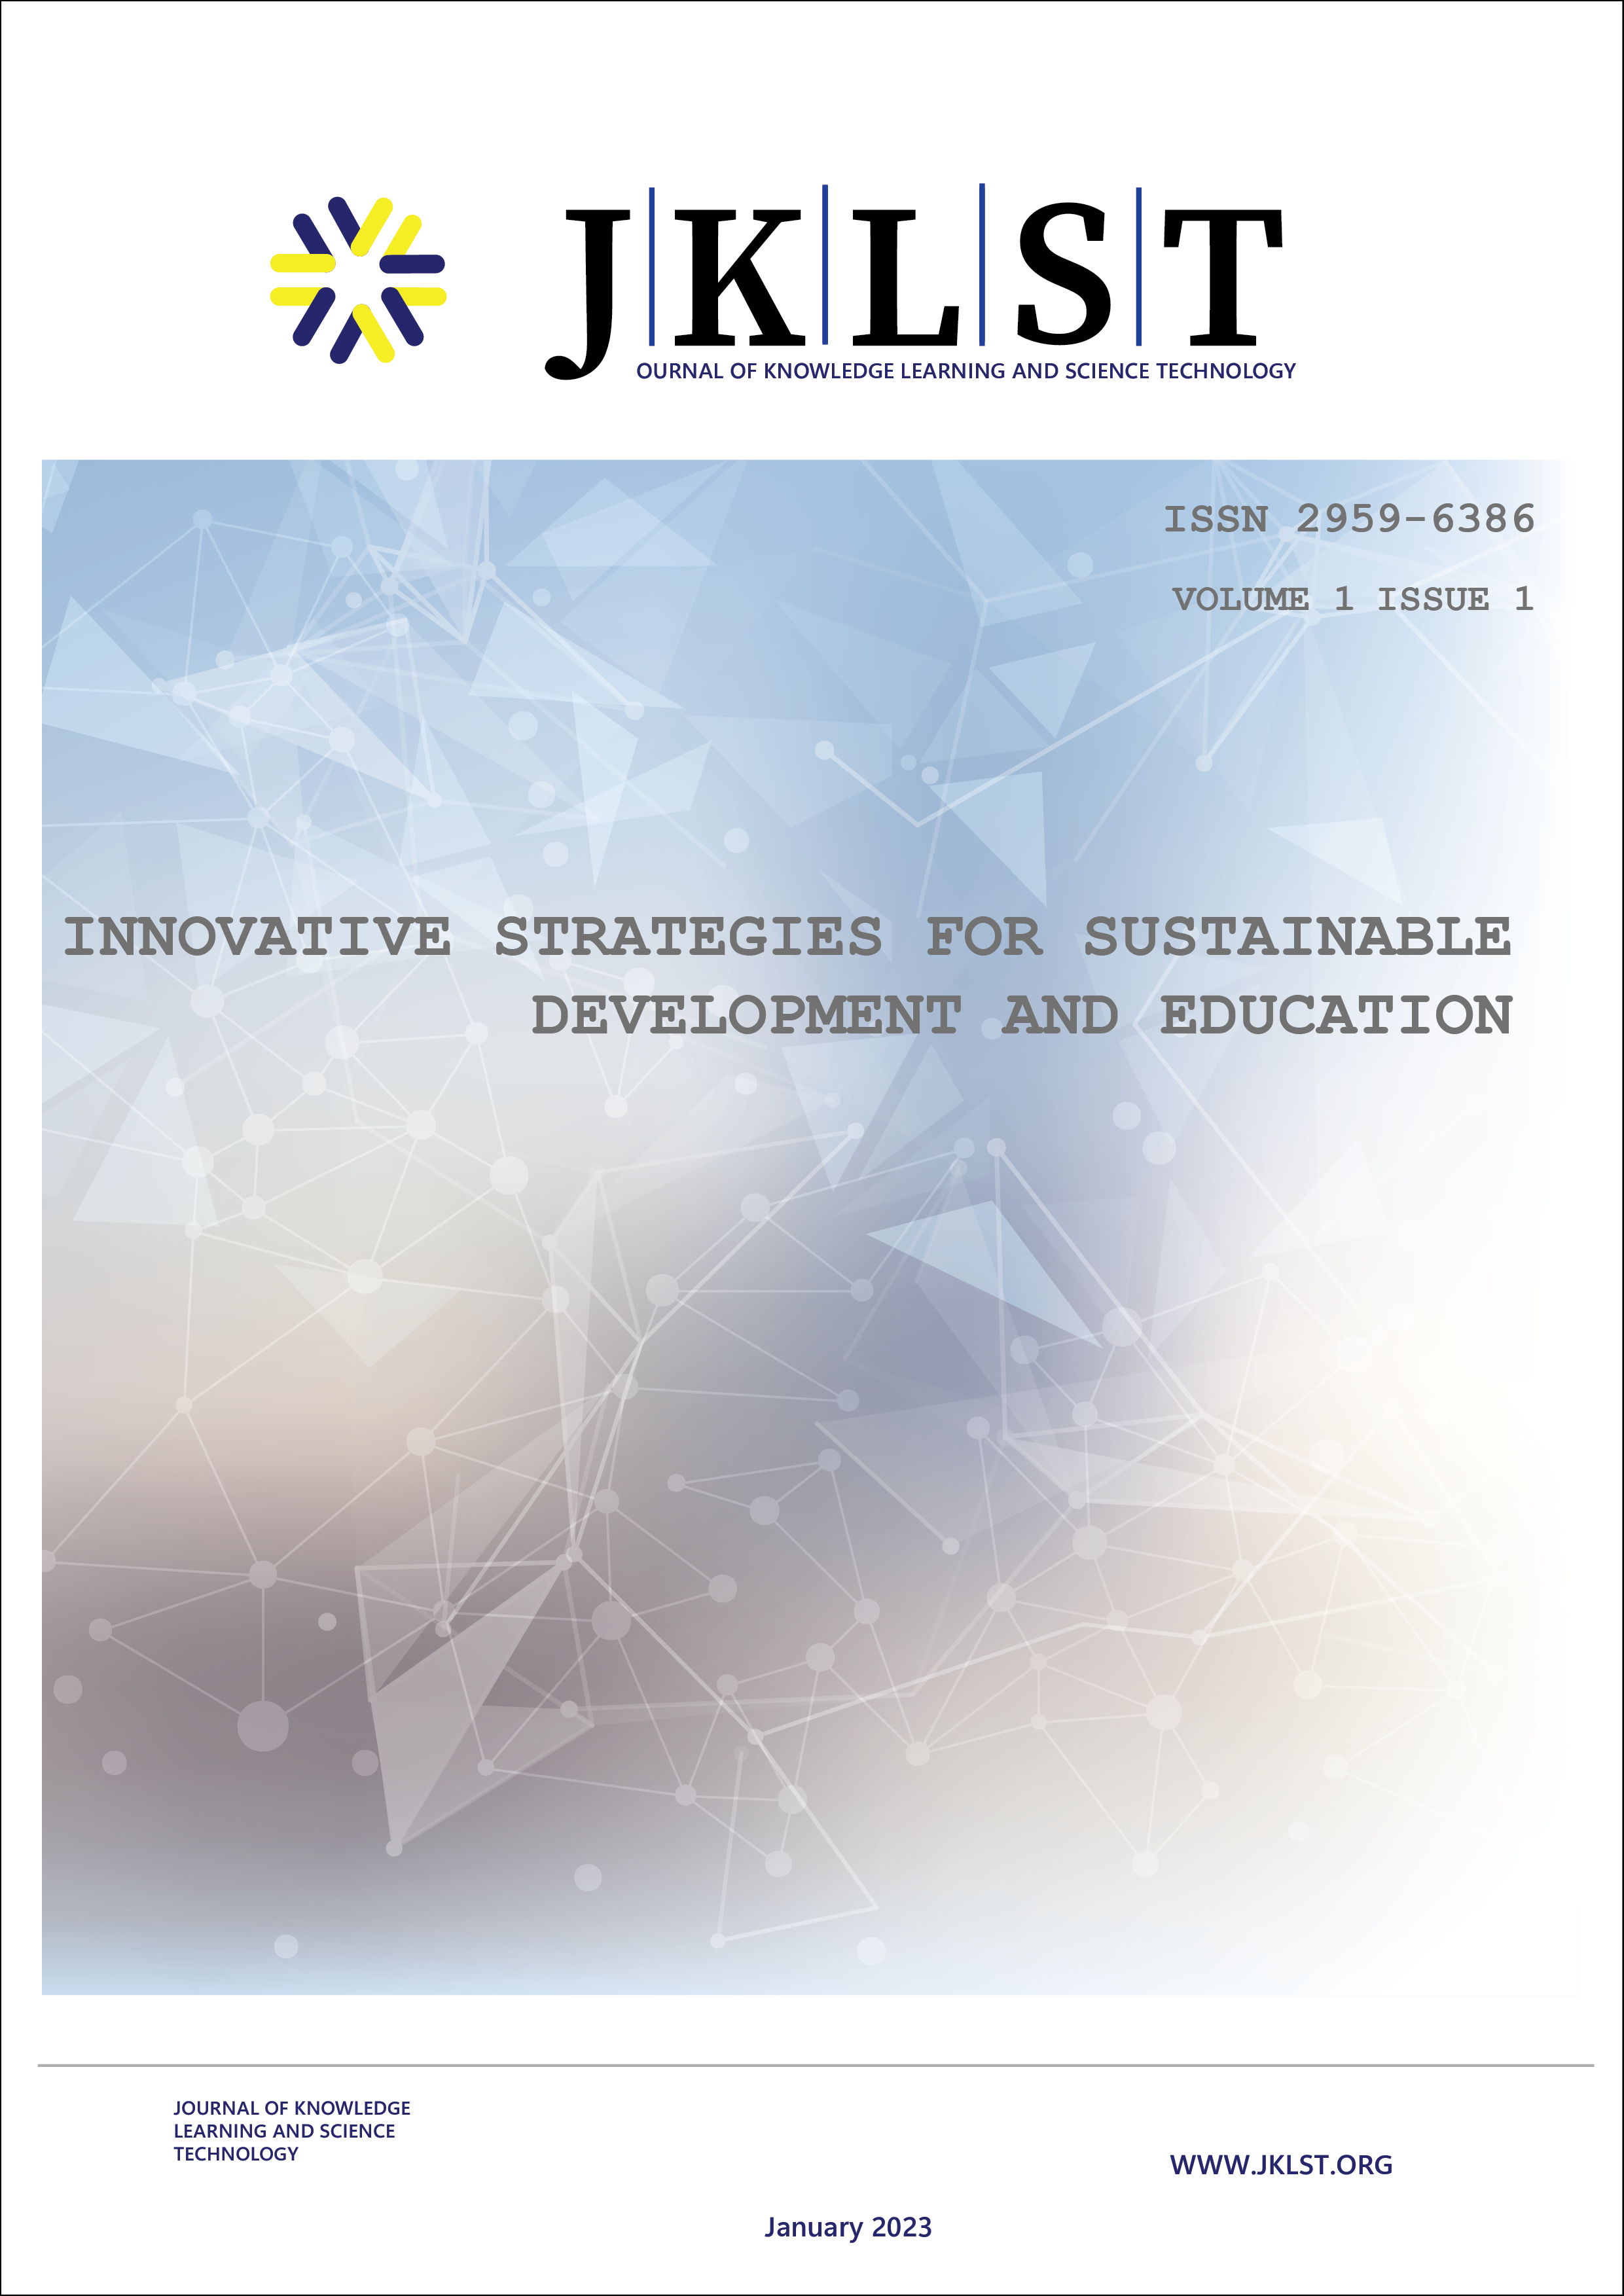 					View Vol. 1 No. 1: Innovative Strategies for Sustainable Development and Education
				